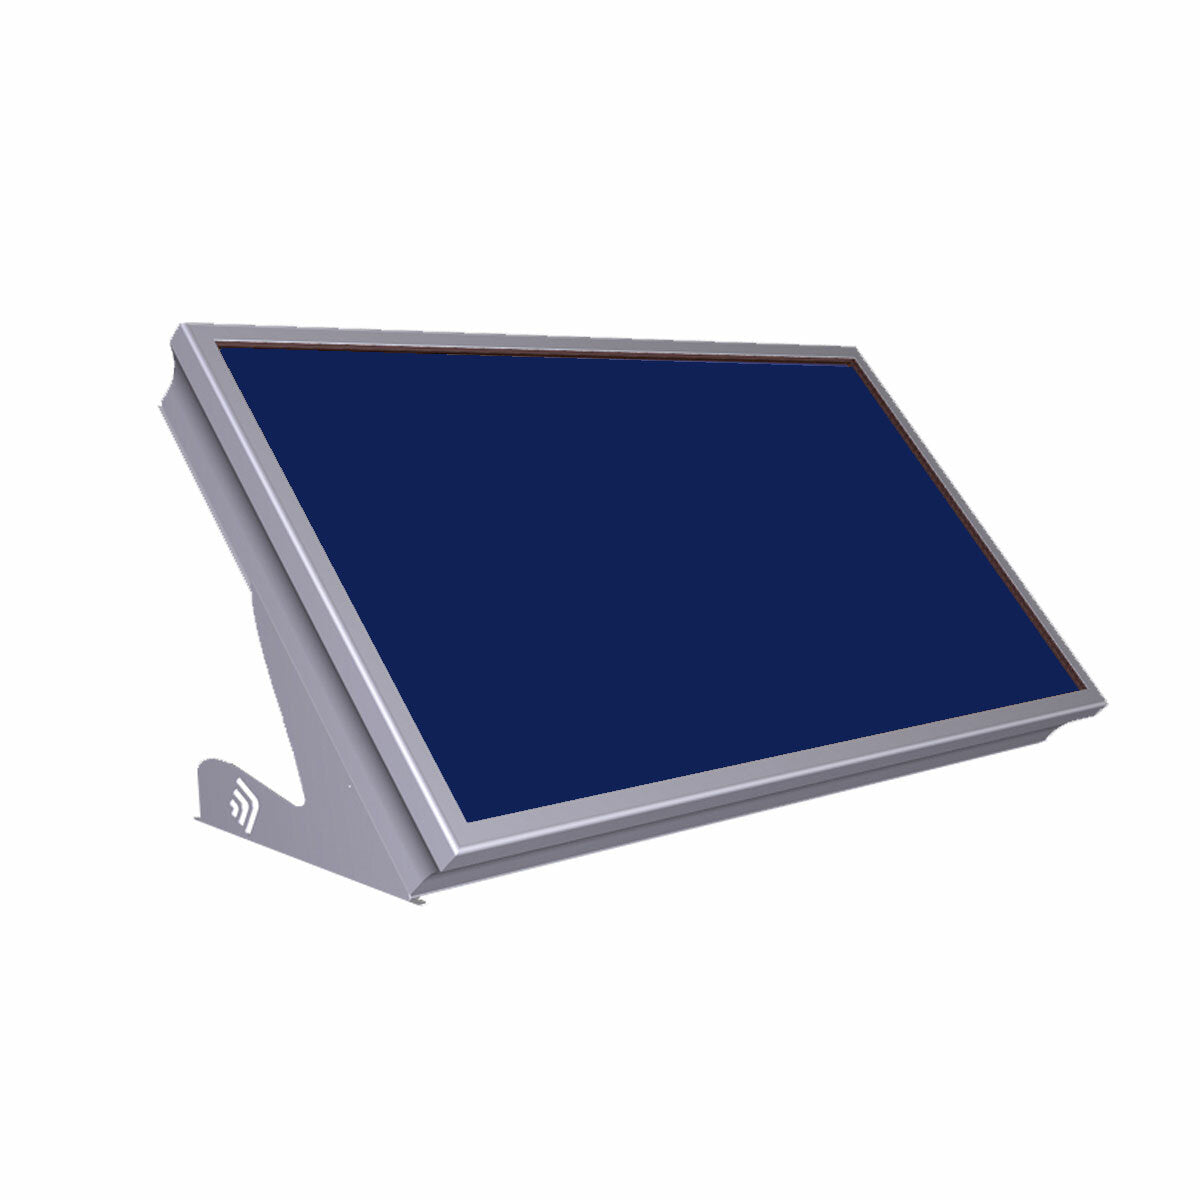 Cordivari Stratos DR 110 natural circulation solar panel for flat and pitched roof 105 liters